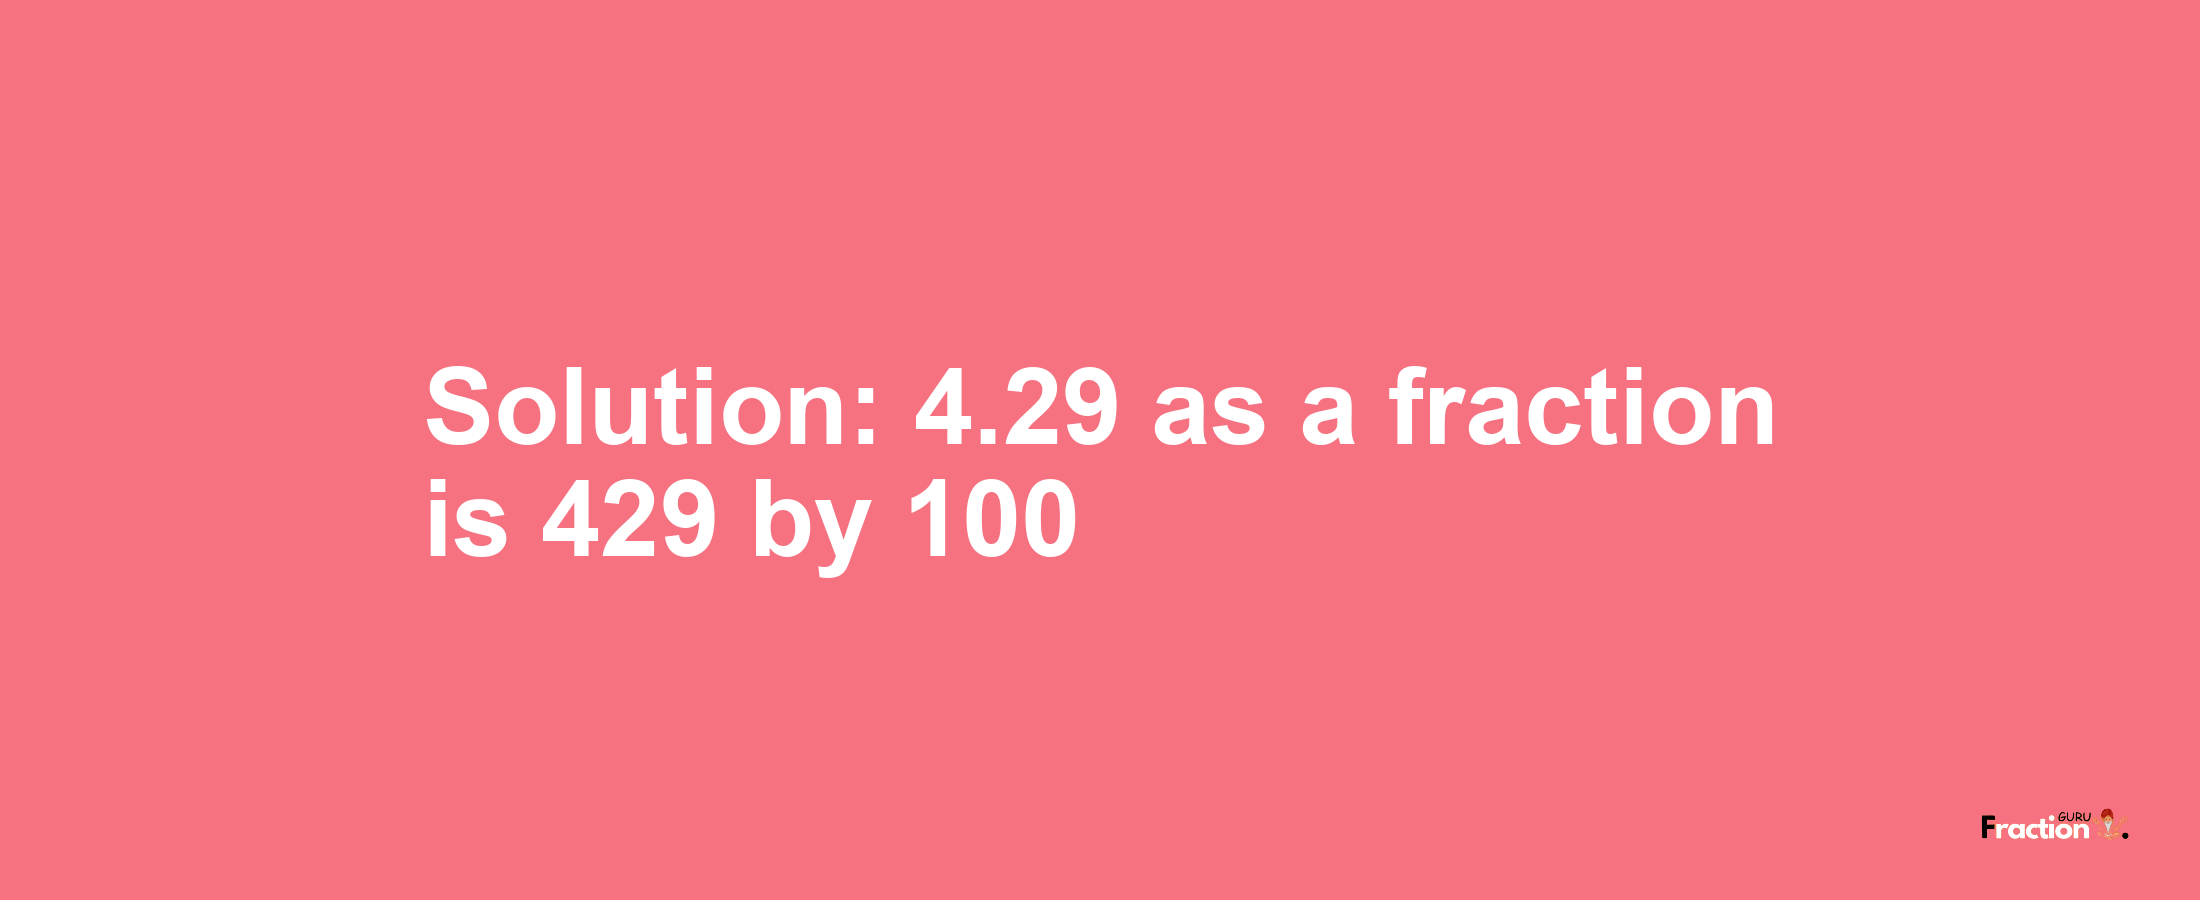 Solution:4.29 as a fraction is 429/100